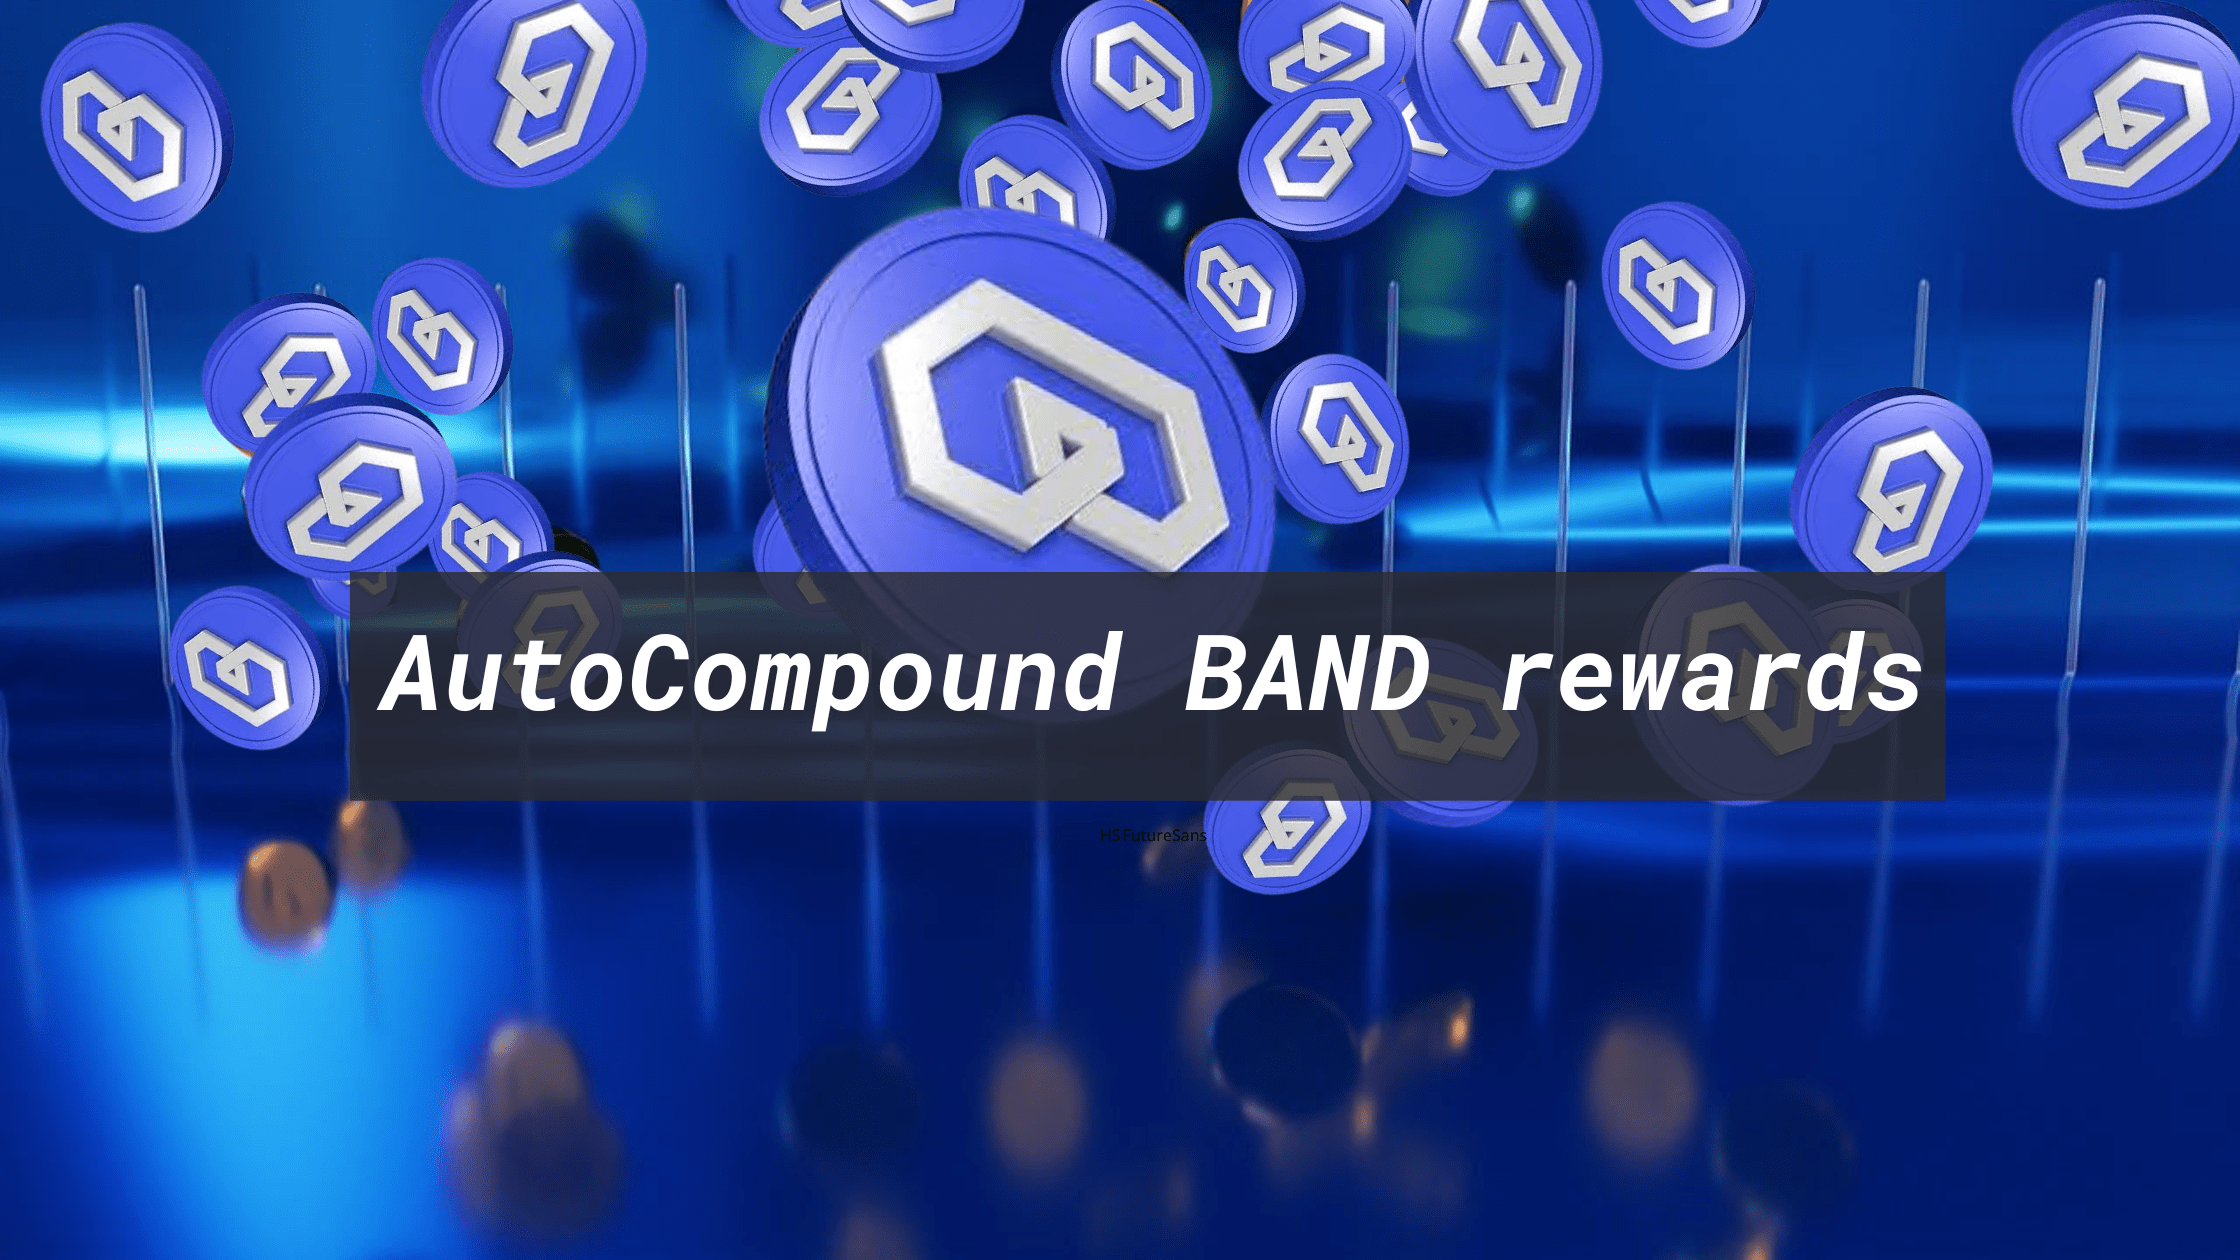 Band protocol, BAND validator, which BAND validator should I stake with, the best BAND validator, how to stake BAND, where to stake BAND, auto compound BAND staking rewards, yieldmos, REstake